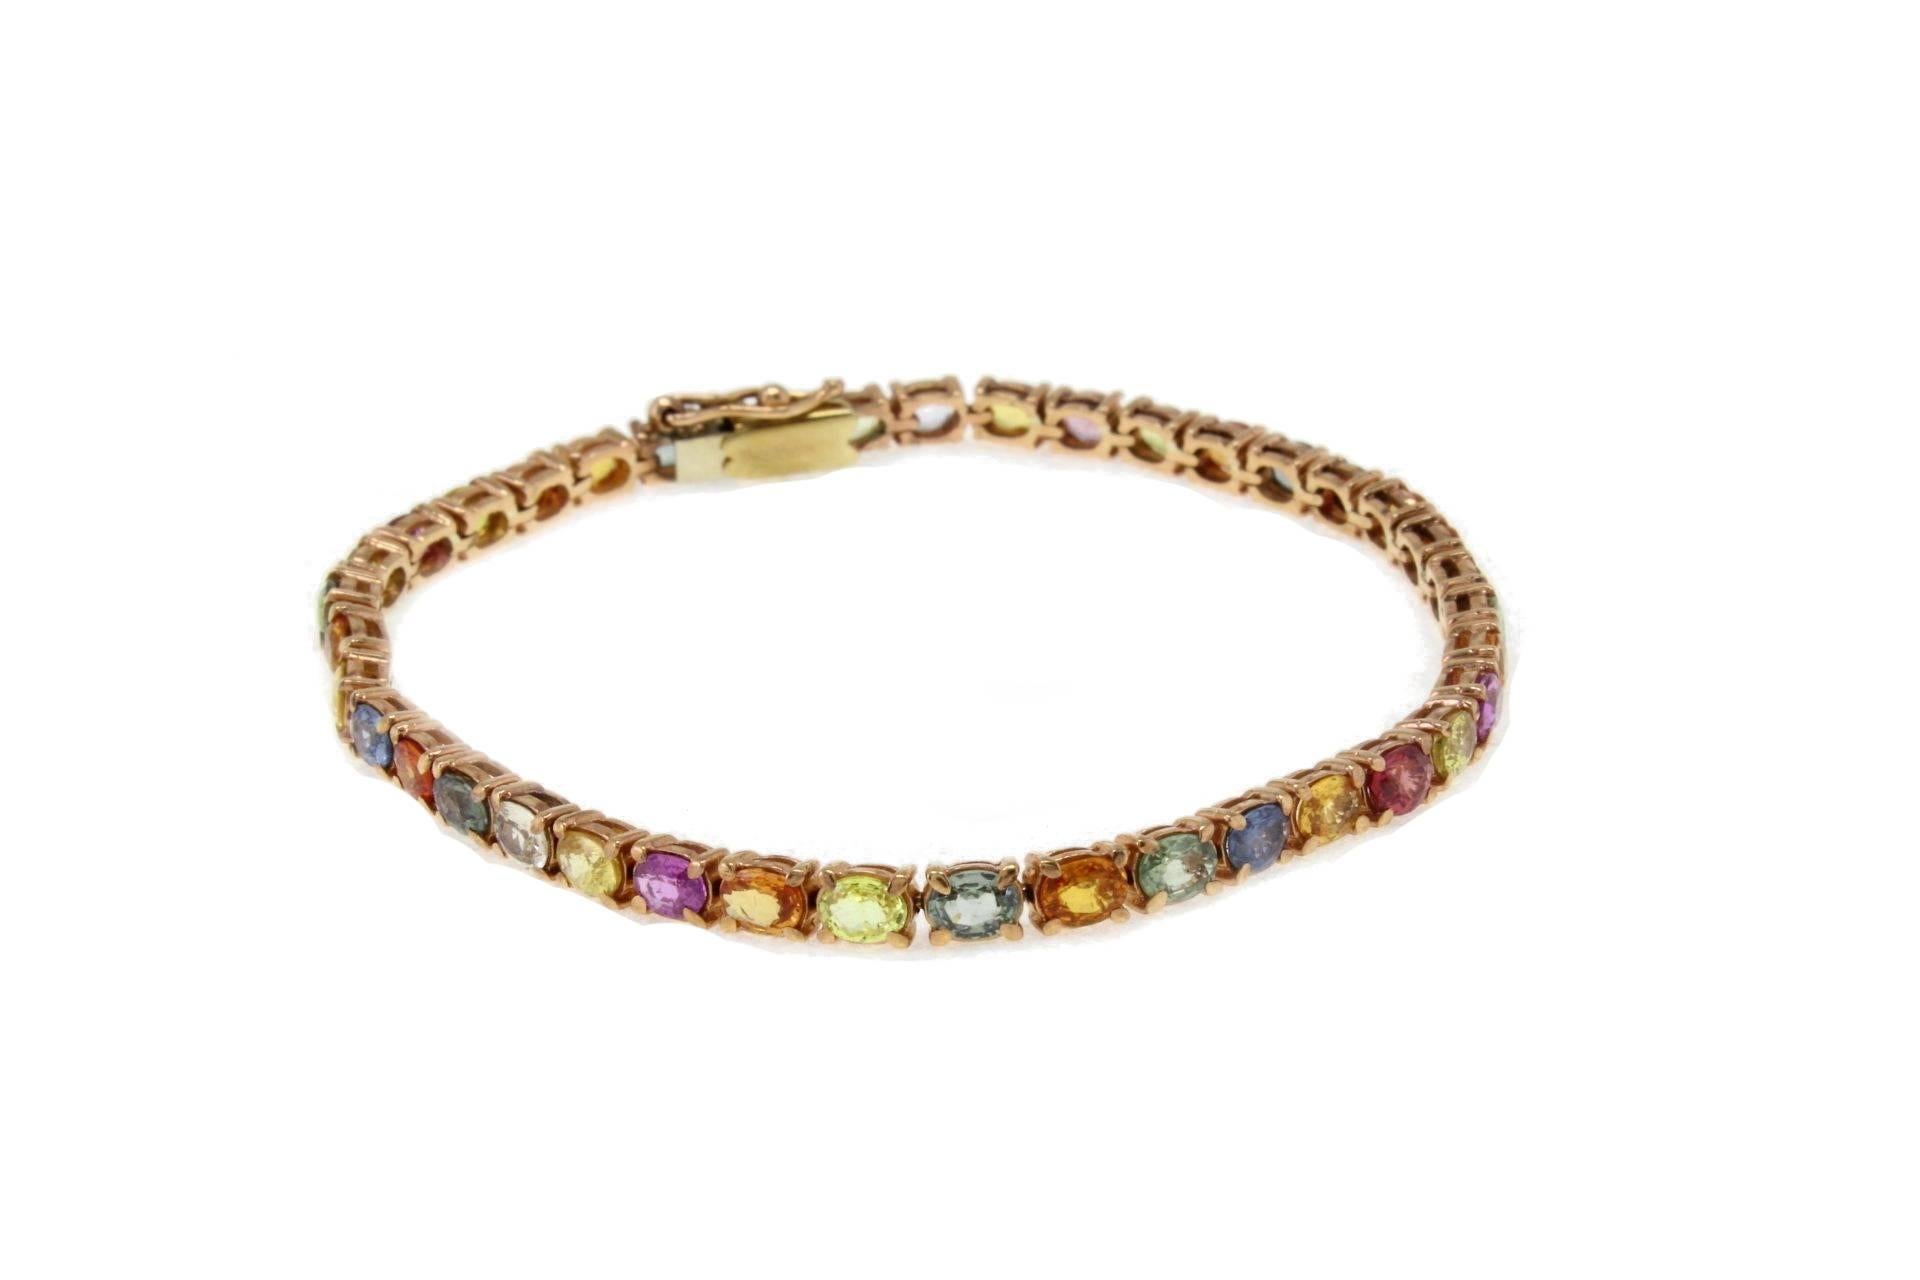 9kt rose gold bracelet mounted with yellow sapphires, blue sapphires, red sapphires, green sapphires, pink sapphires.
Multicolor Sapphires 9.27 kt
Tot.weight 9.80 gr
R.F gfoo